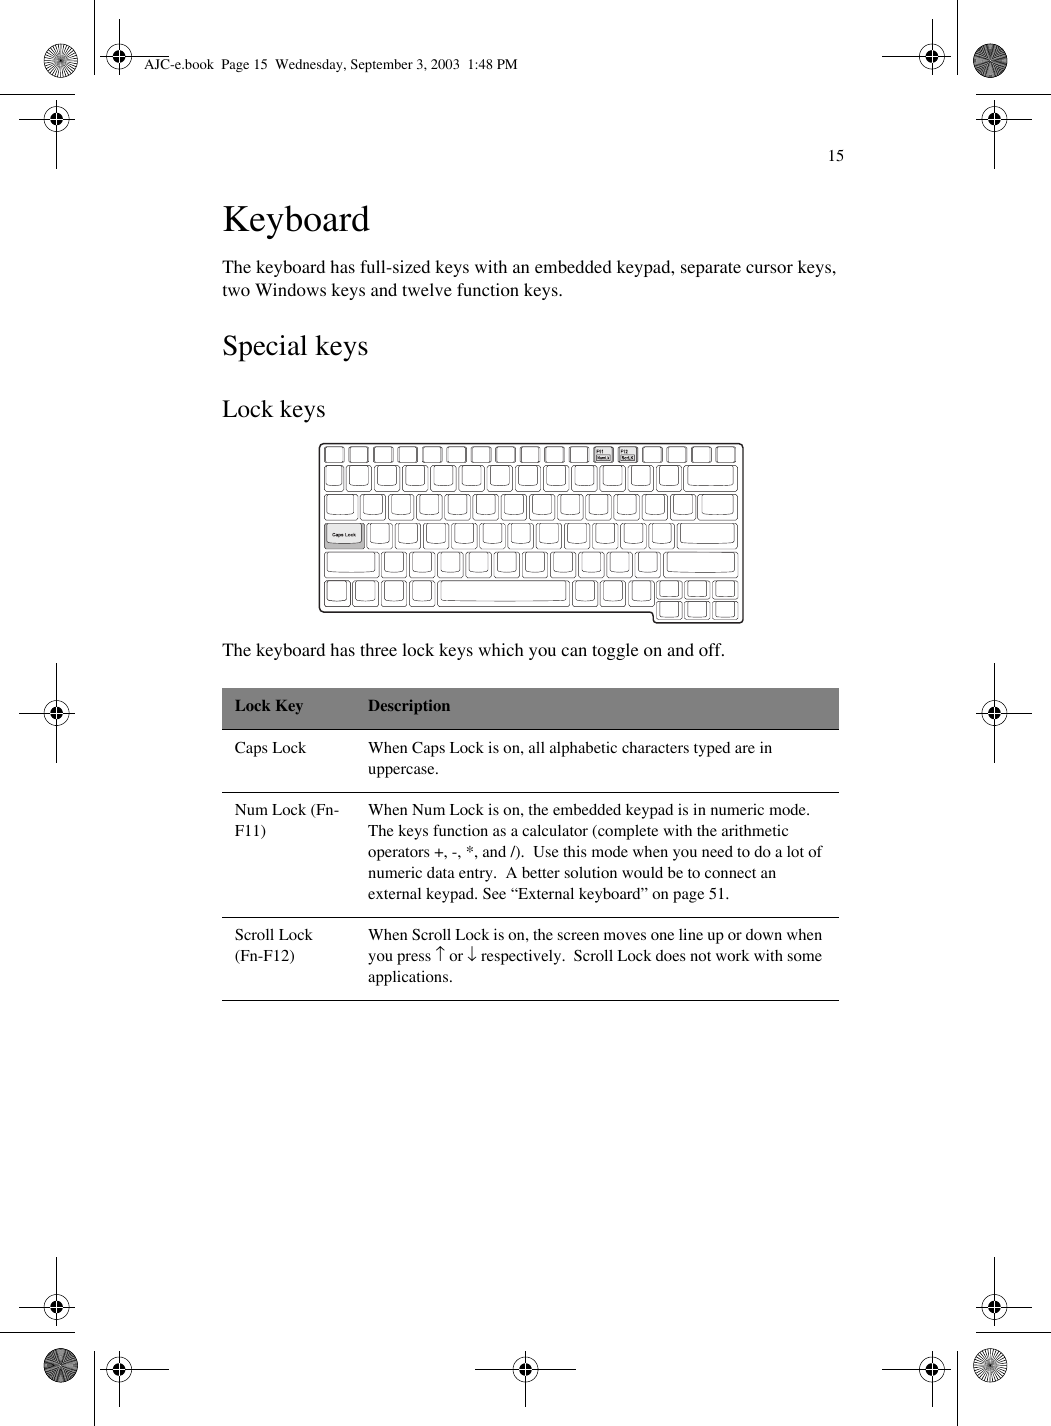 15KeyboardThe keyboard has full-sized keys with an embedded keypad, separate cursor keys, two Windows keys and twelve function keys.Special keysLock keysThe keyboard has three lock keys which you can toggle on and off.Lock Key DescriptionCaps Lock When Caps Lock is on, all alphabetic characters typed are in uppercase.Num Lock (Fn-F11)When Num Lock is on, the embedded keypad is in numeric mode.  The keys function as a calculator (complete with the arithmetic operators +, -, *, and /).  Use this mode when you need to do a lot of numeric data entry.  A better solution would be to connect an external keypad. See “External keyboard” on page 51.Scroll Lock (Fn-F12)When Scroll Lock is on, the screen moves one line up or down when you press ↑ or ↓ respectively.  Scroll Lock does not work with some applications.AJC-e.book  Page 15  Wednesday, September 3, 2003  1:48 PM